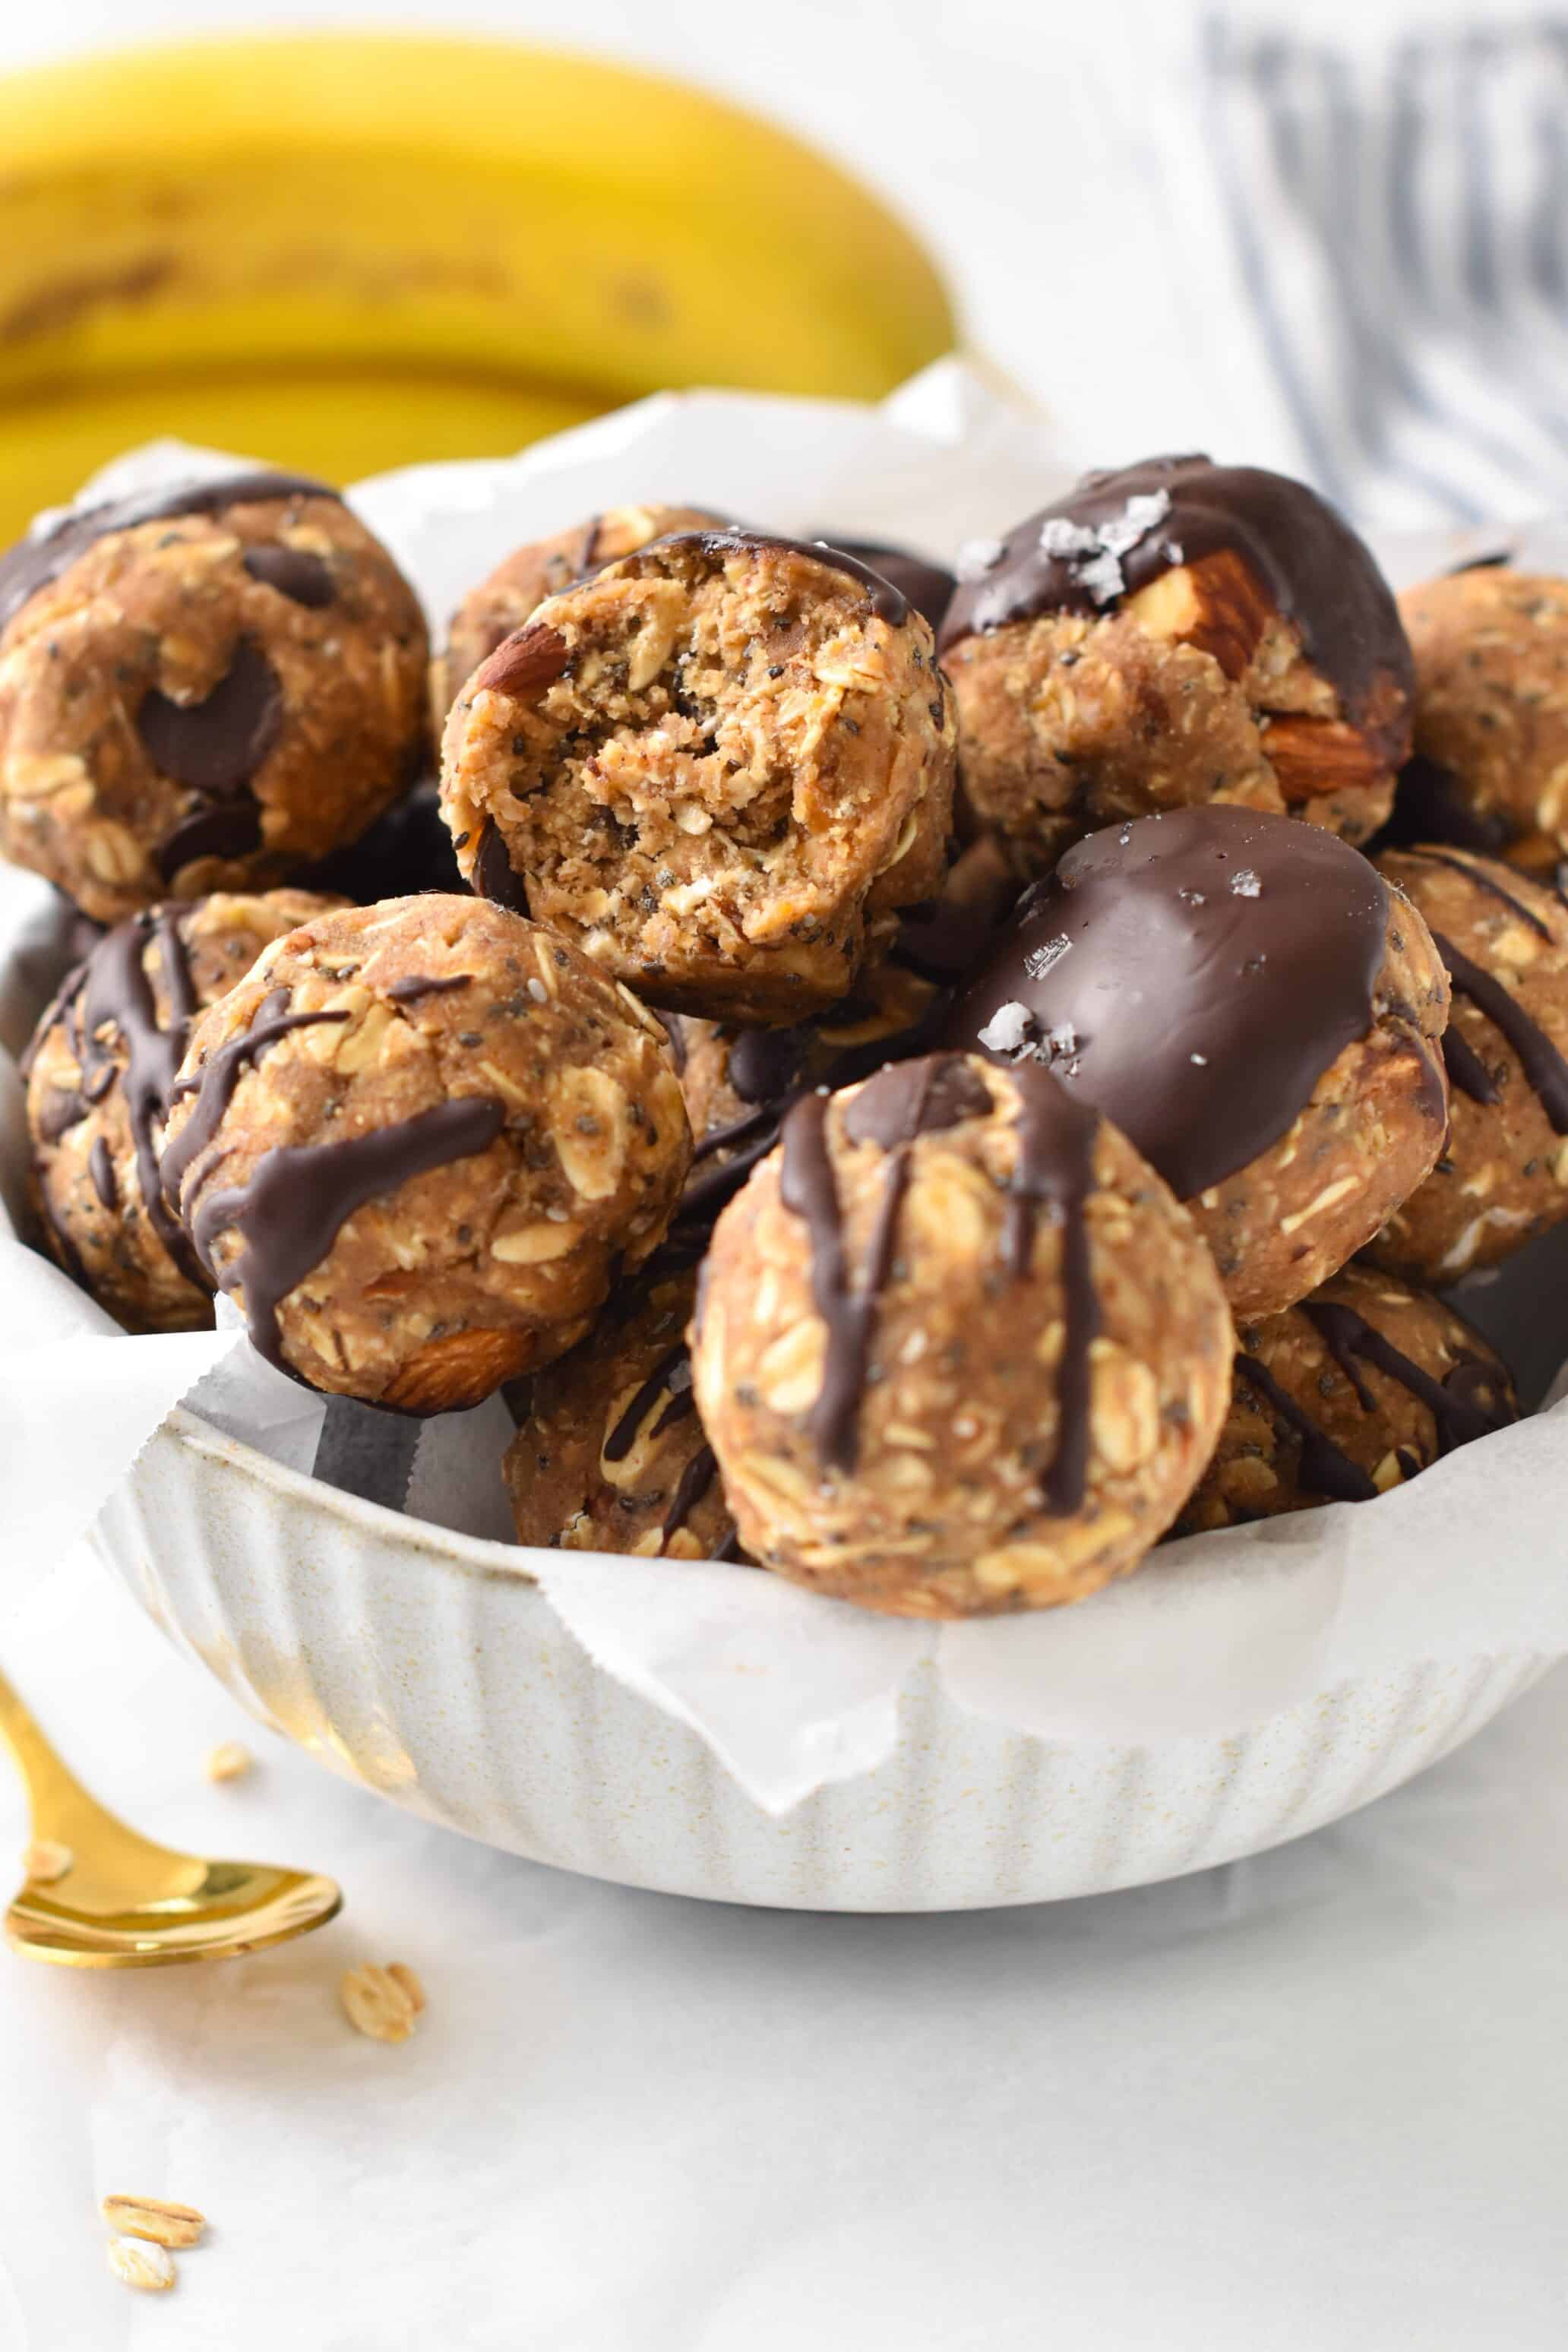 These Banana Protein Balls are healthy homemade protein snack to fix your sweet tooth and fill you up with proteins.